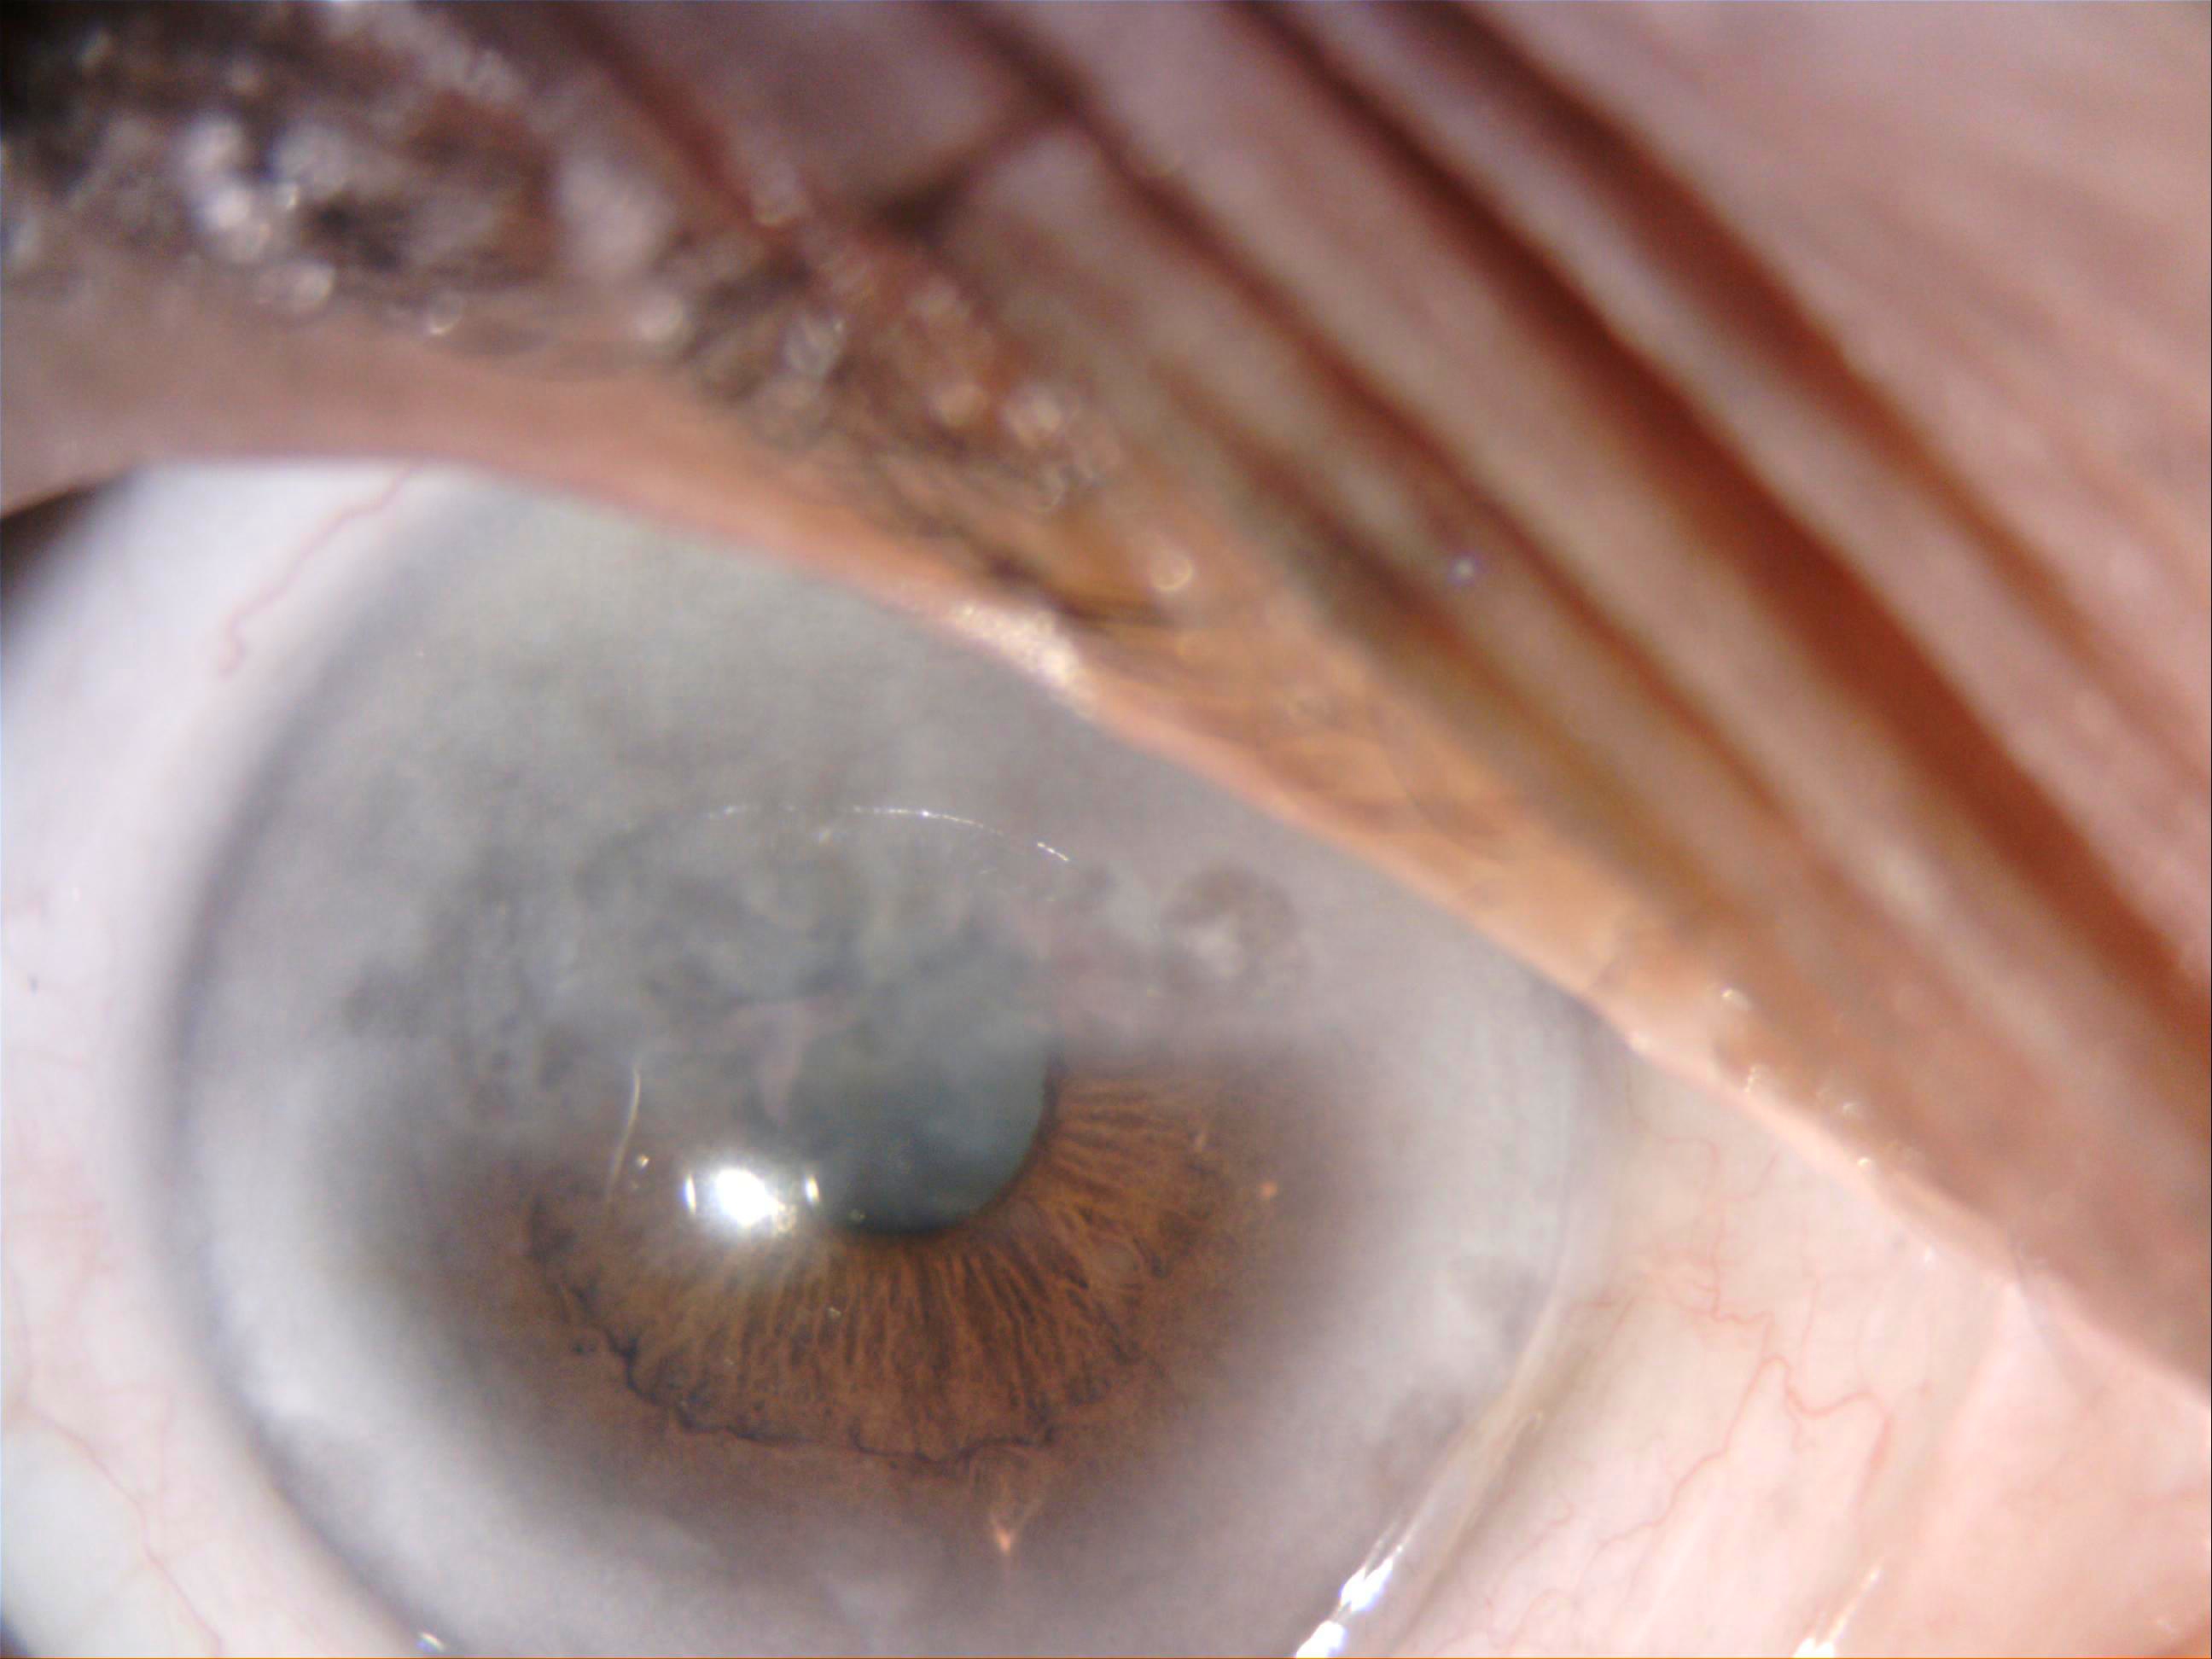 Slit-lamp image shows interstitial keratitis in a patient with hearing loss